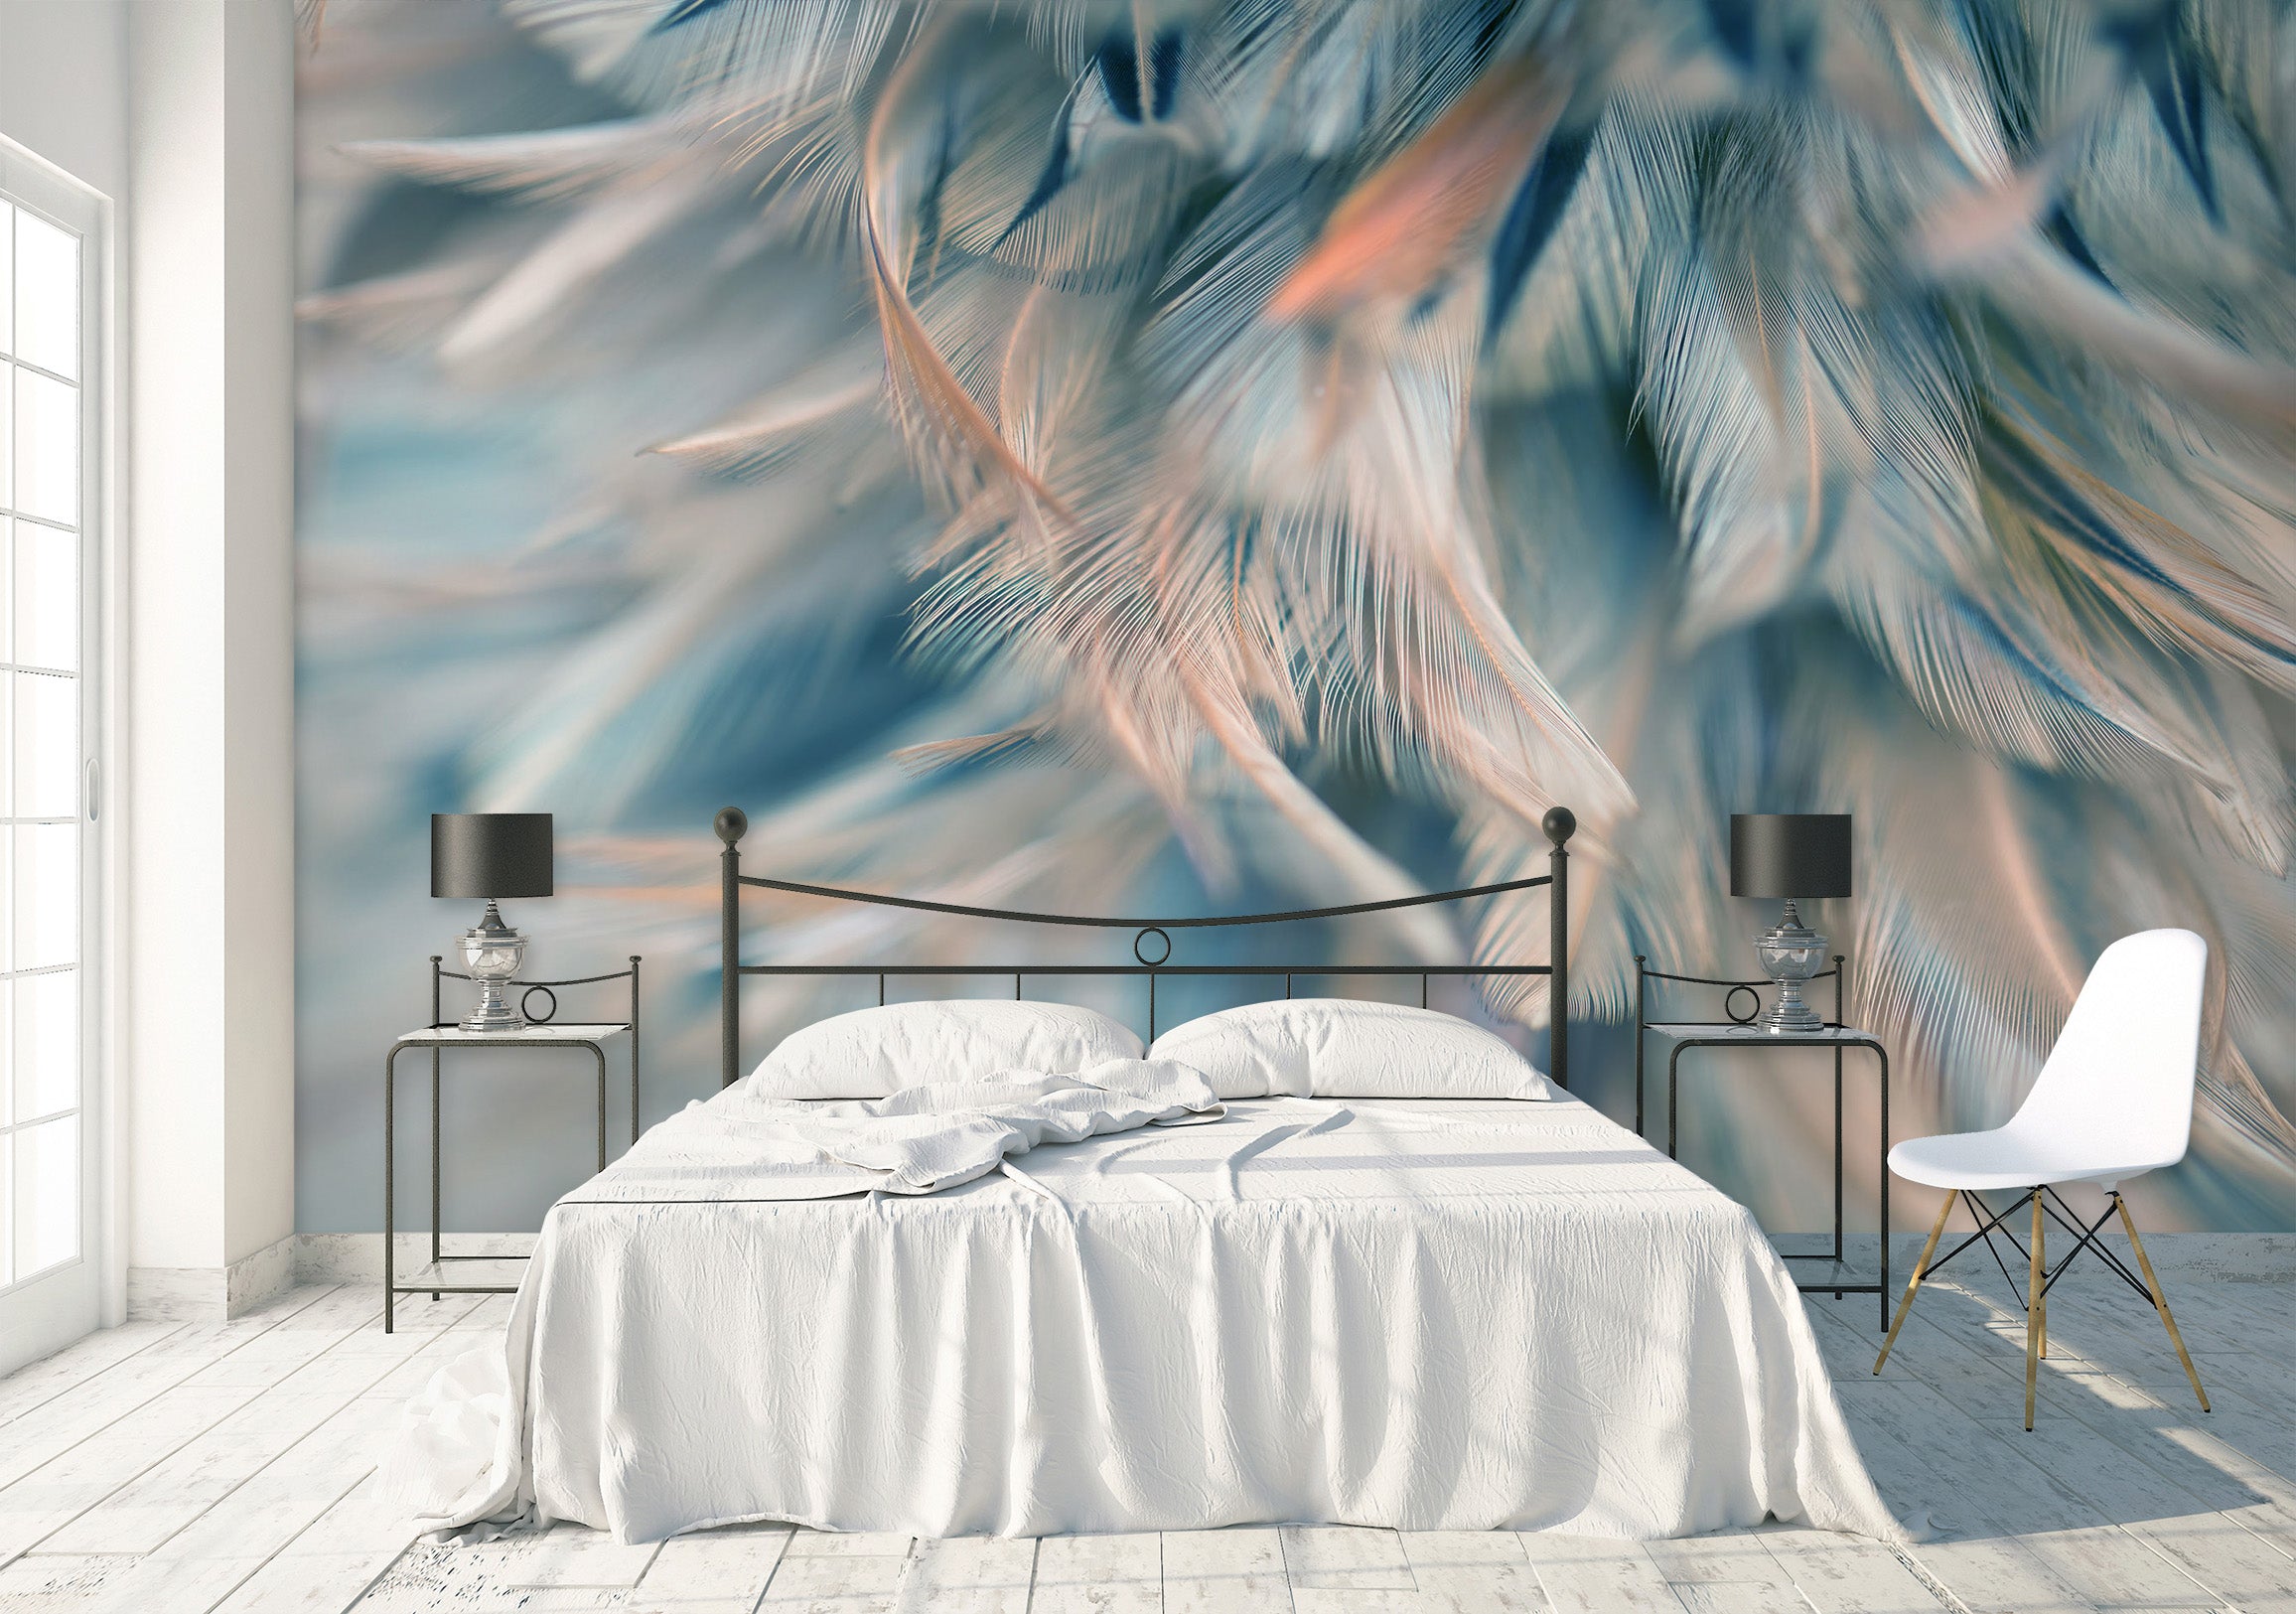 3D Colored Feathers 1680 Wall Murals